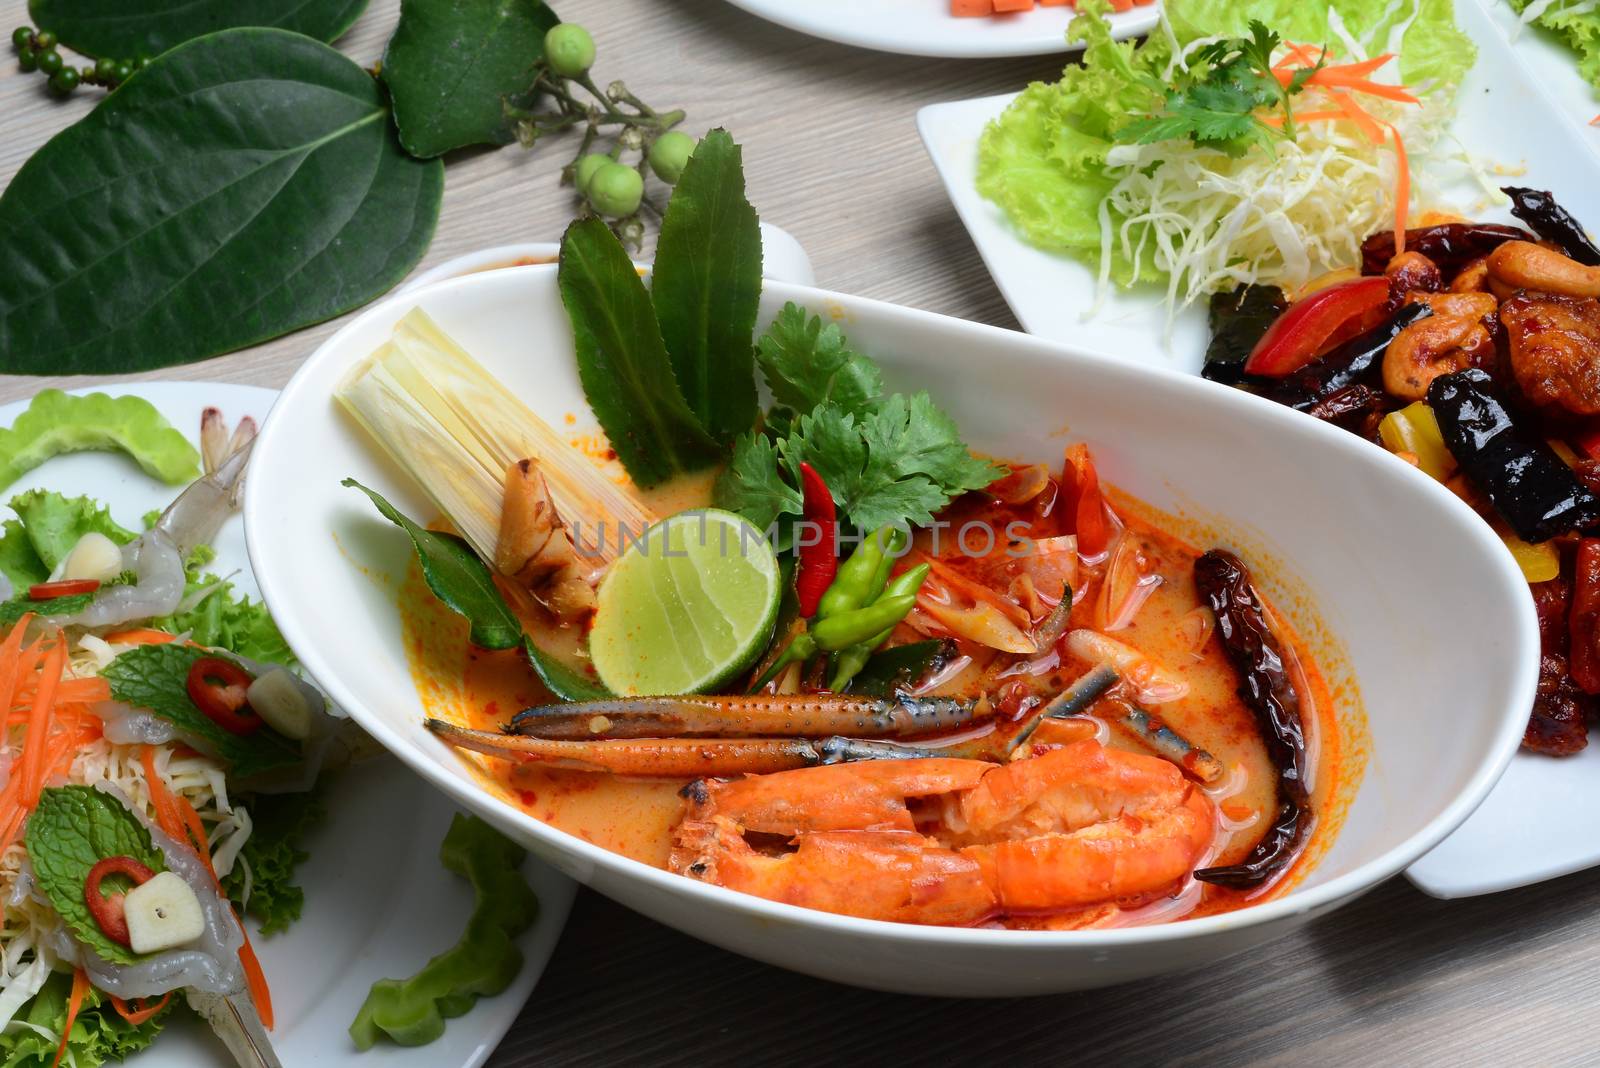 River prawn spicy soup,(in Thai: Tom Yum goong or Tom Yum kung) by ideation90